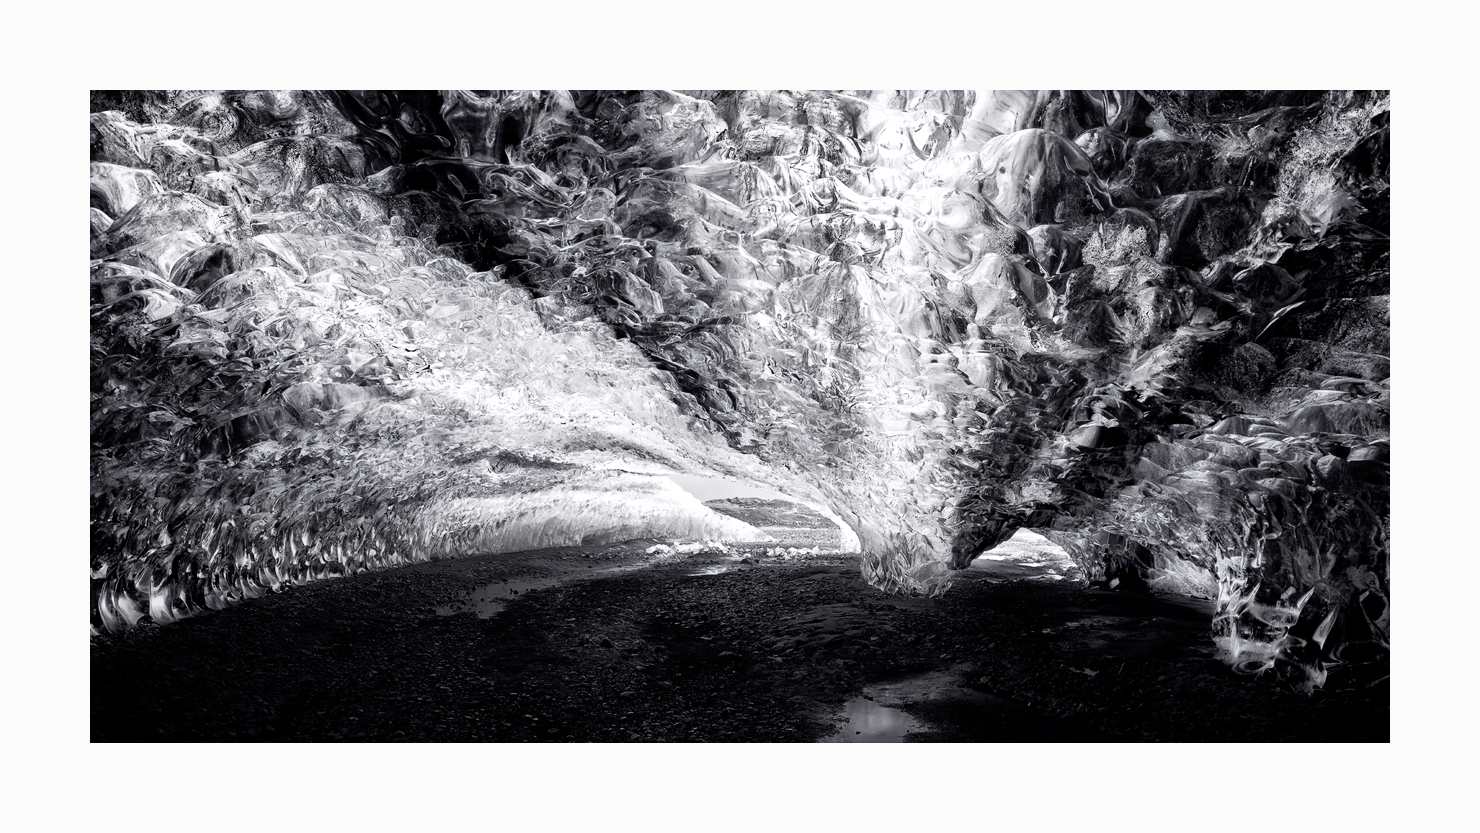 Fine art black and white image of Northern Lights Ice Cave Entrance from the Vatnajökull Glacier, Iceland.